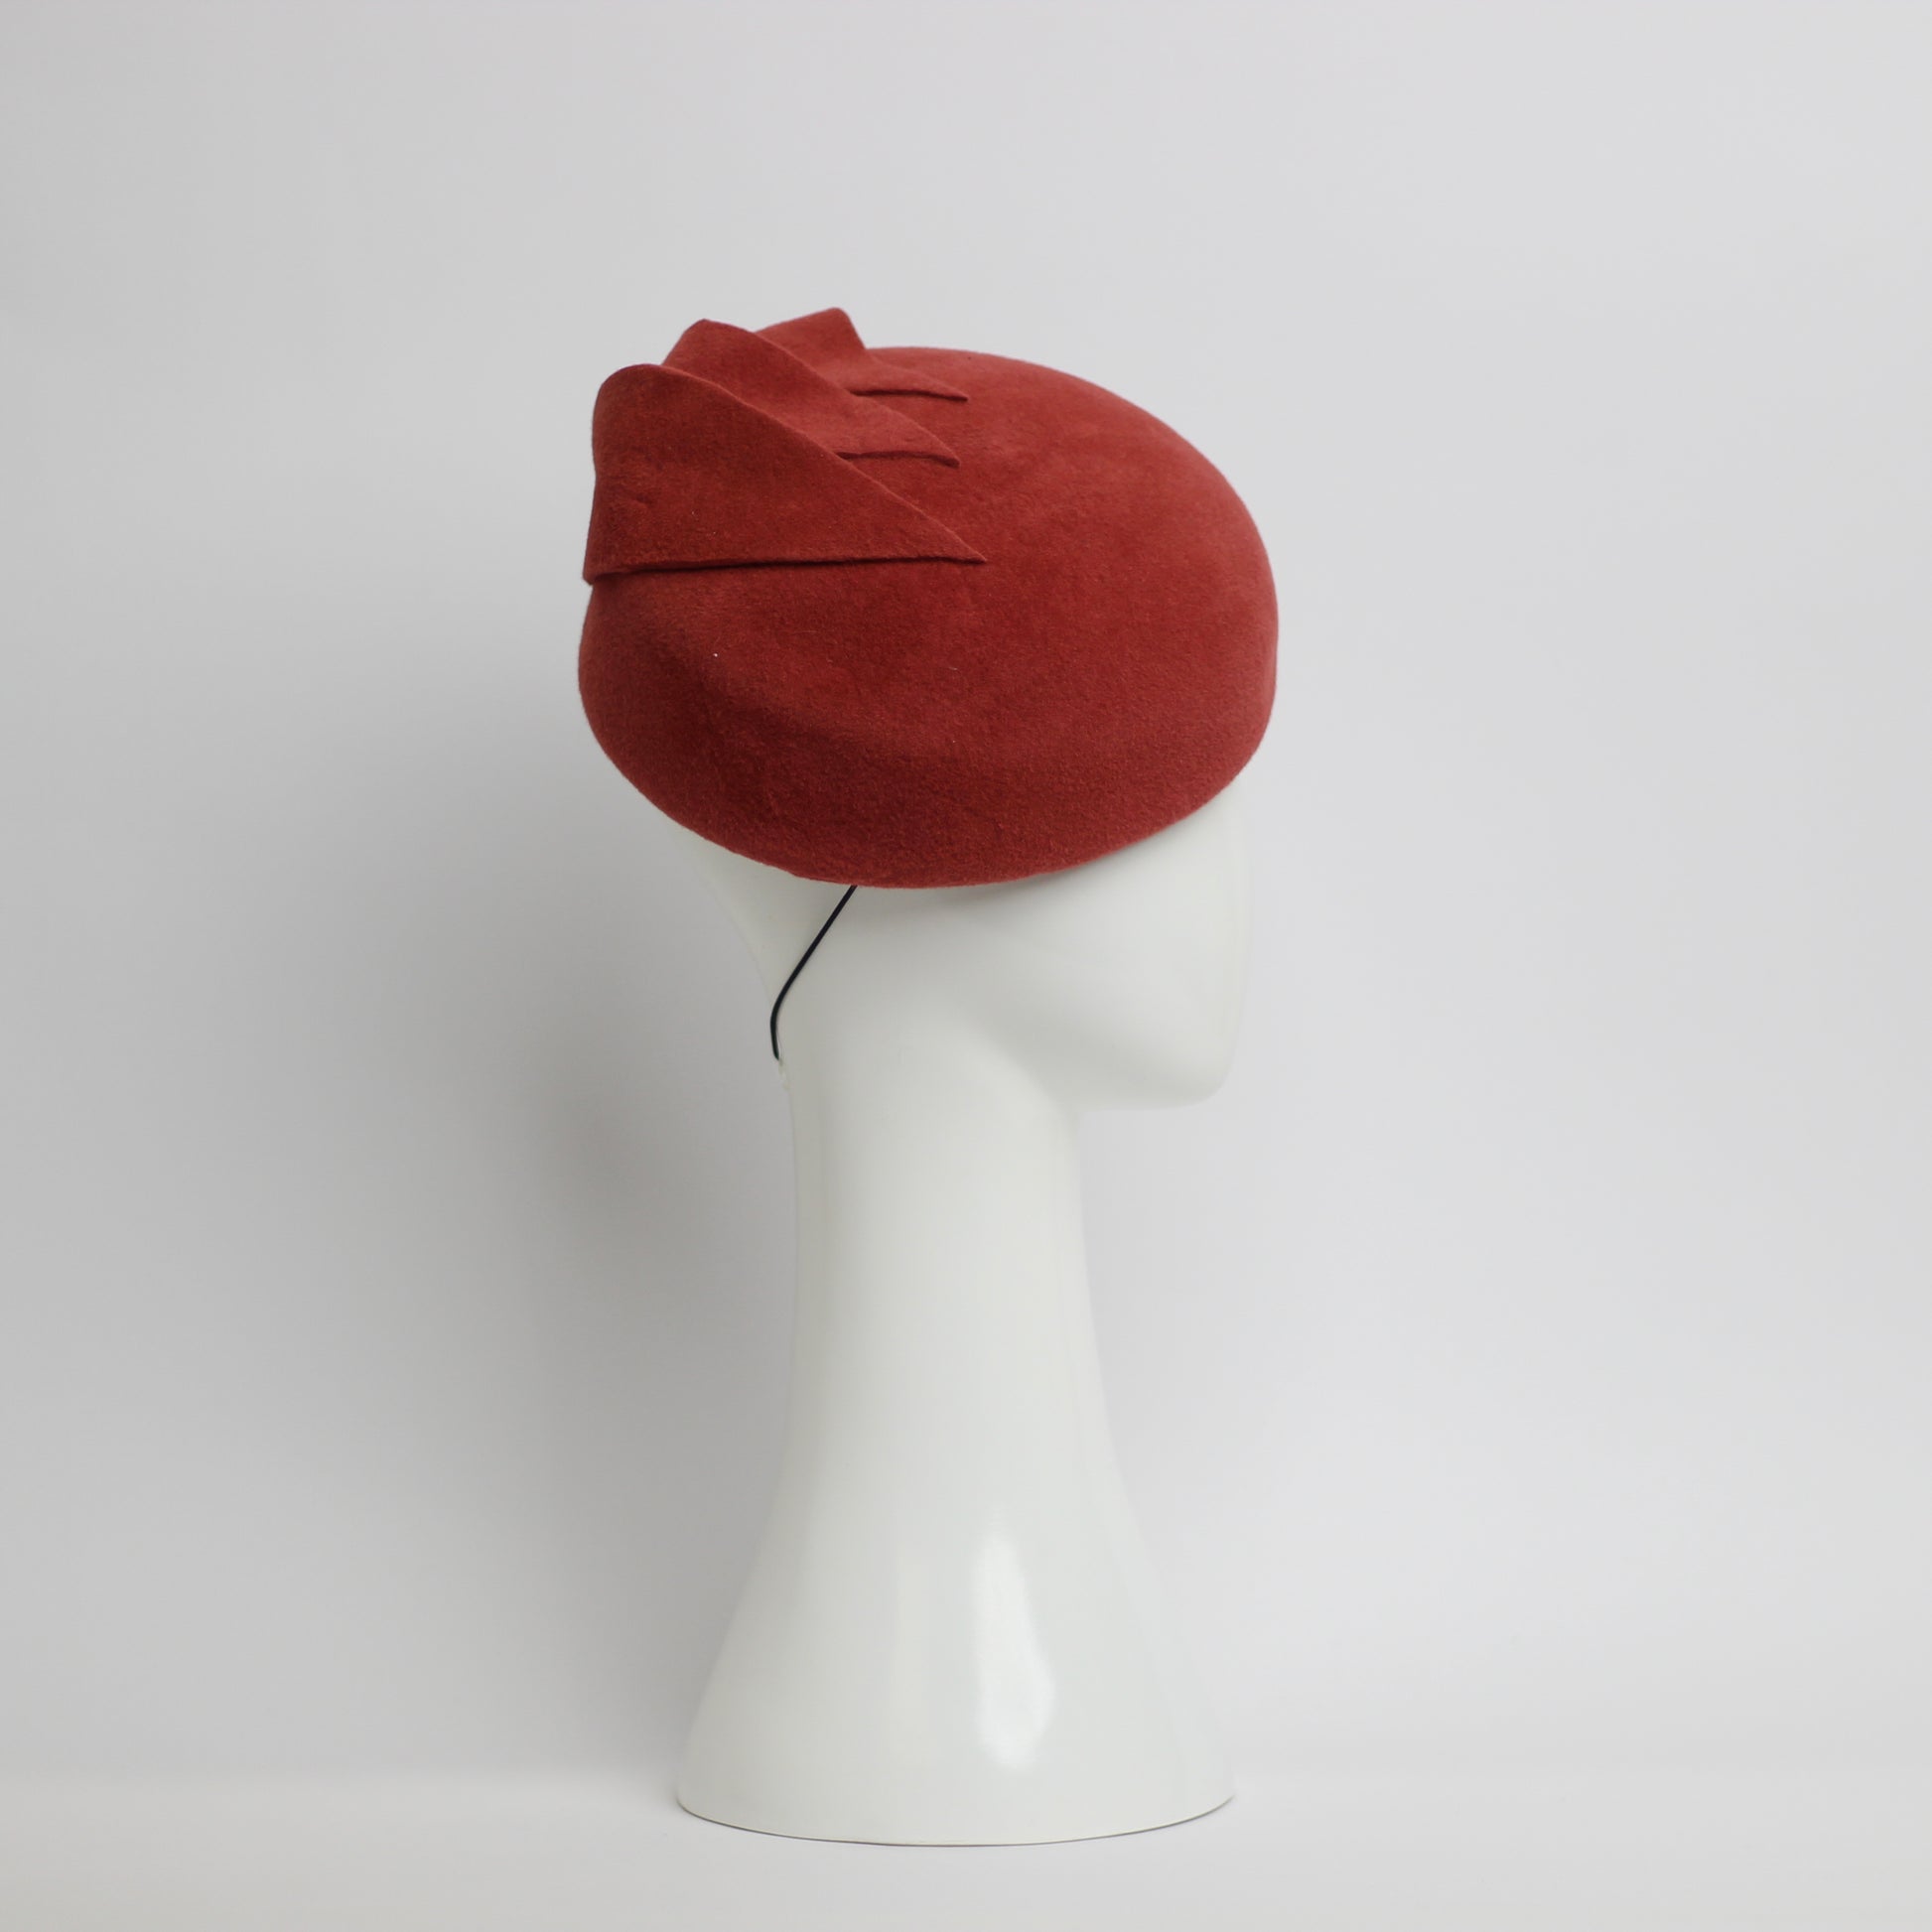 The sideview of a Rusty red coloured fur felt beret with cut felt leaf shape trim by milliner Lauren J Ritchie 